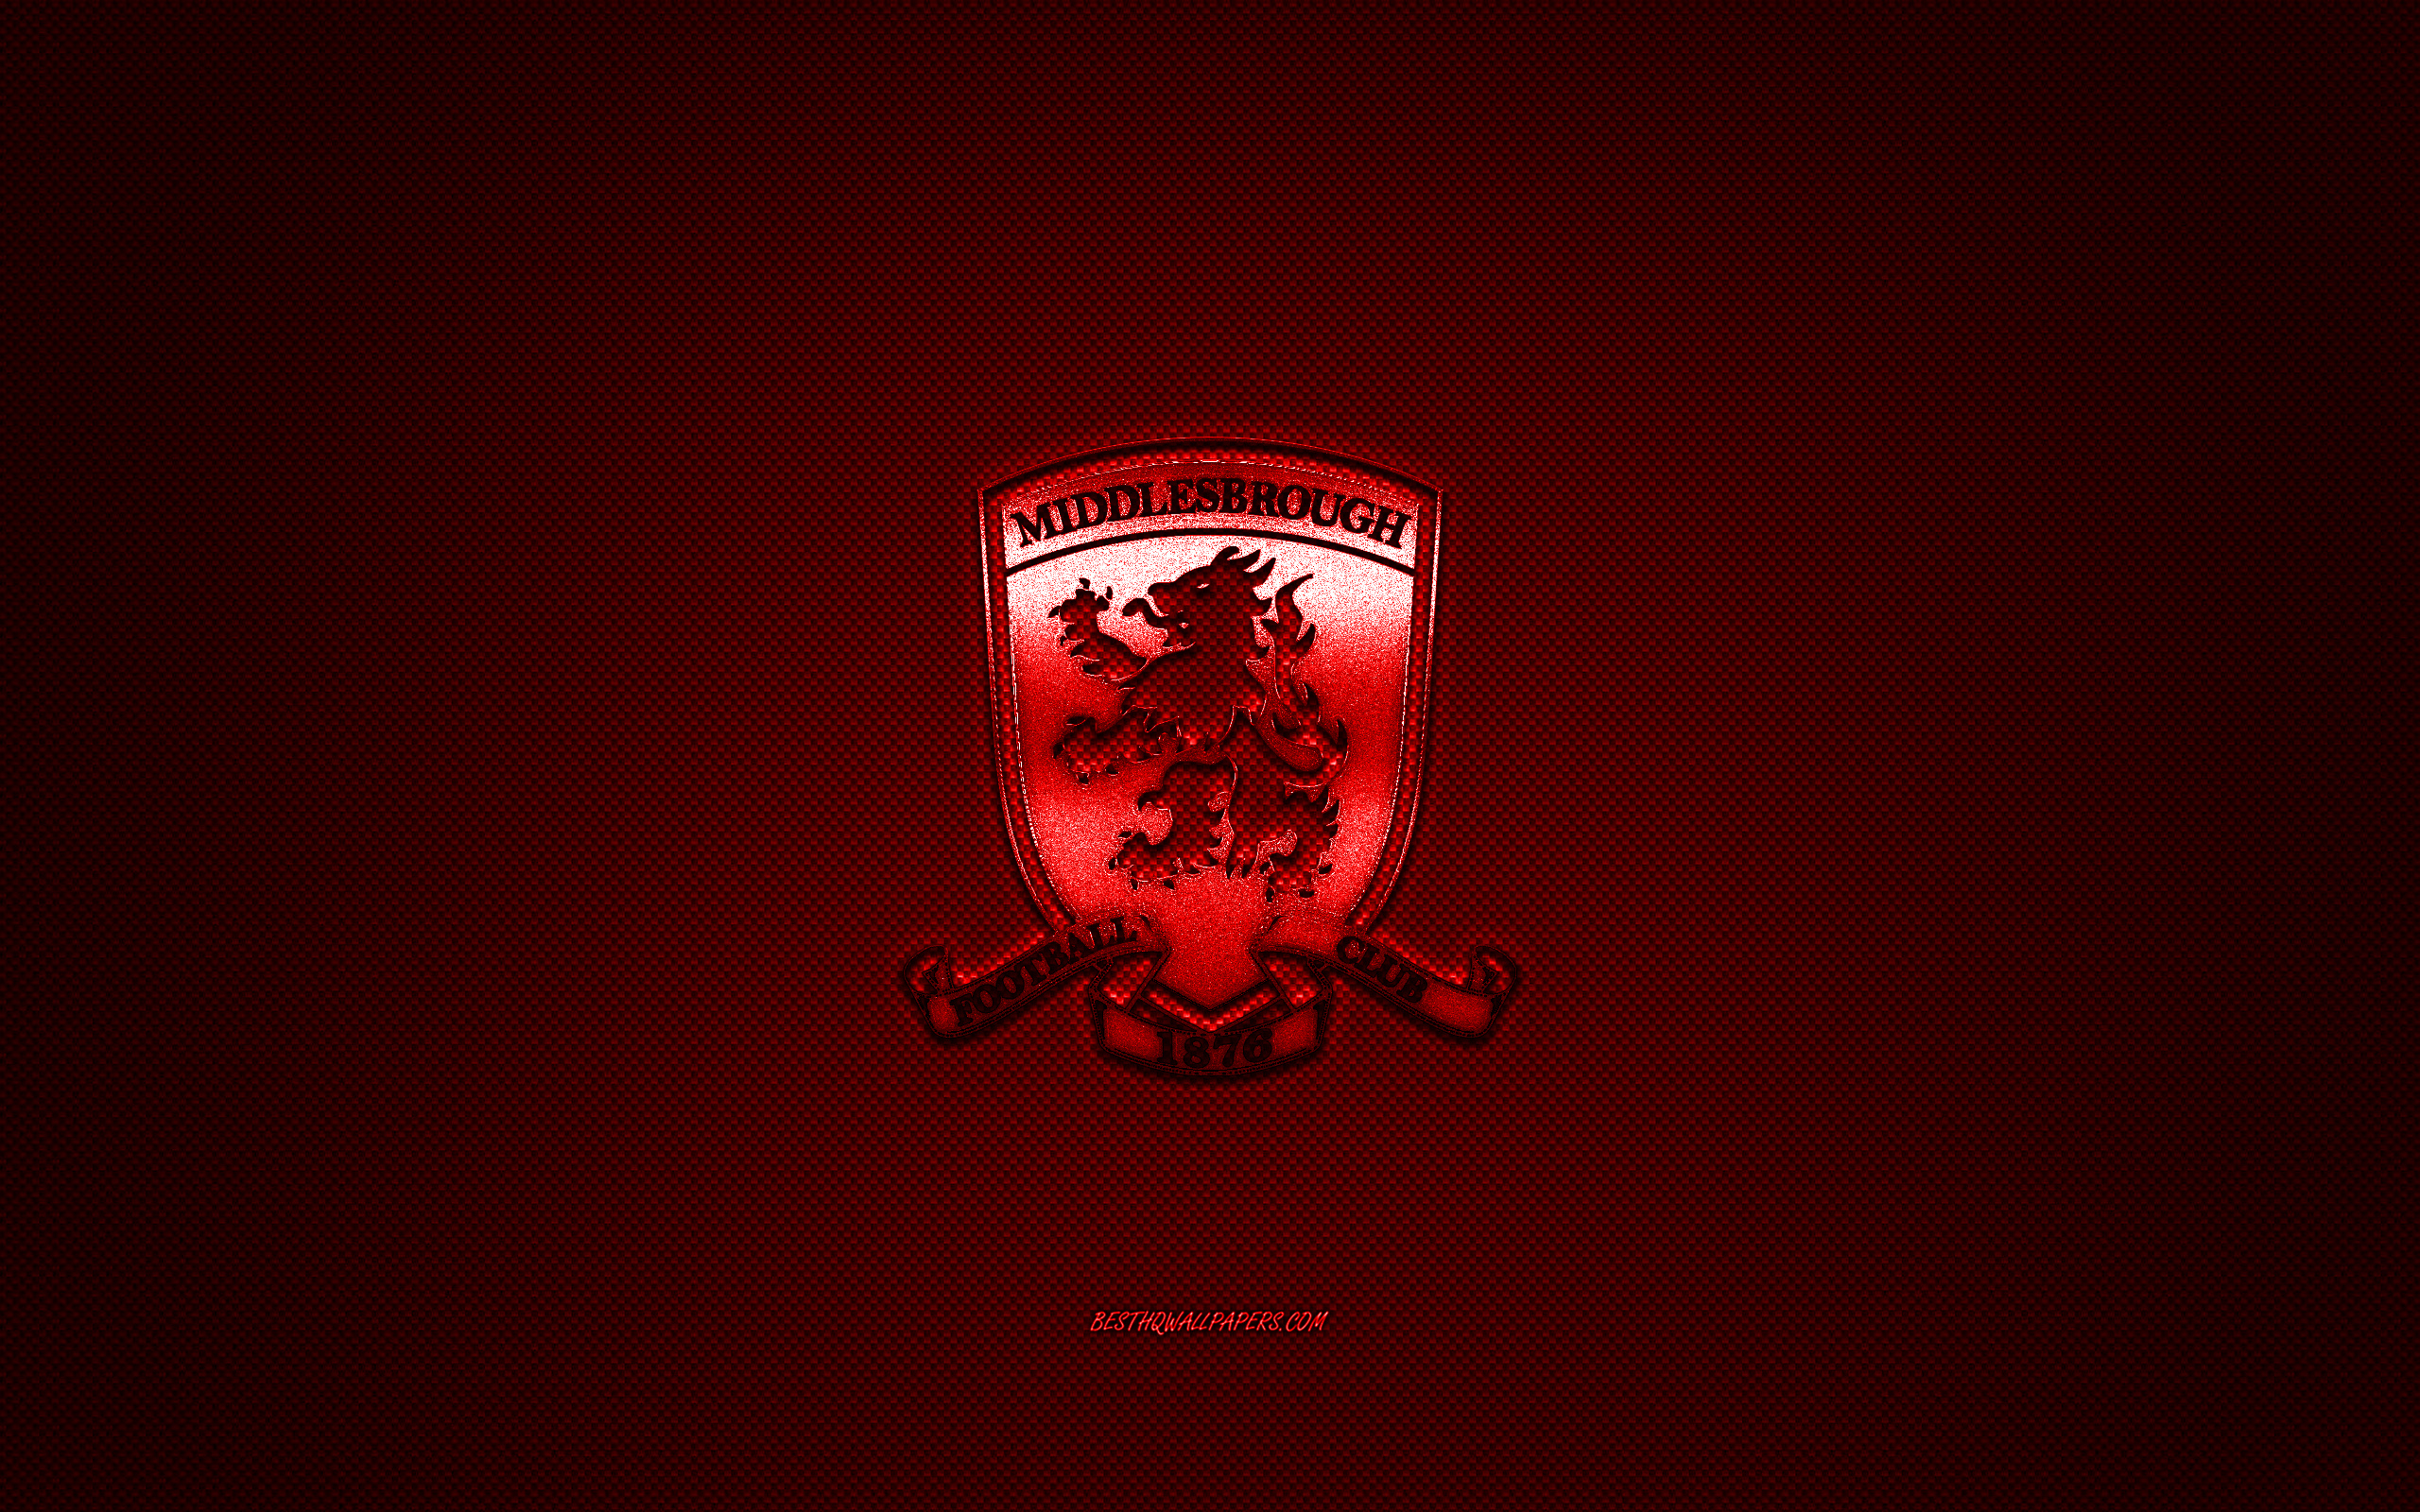 Download wallpaper Middlesbrough FC, English football club, EFL Championship, red logo, red carbon fiber background, football, Middlesbrough, Middlesbrough FC logo for desktop with resolution 2560x1600. High Quality HD picture wallpaper